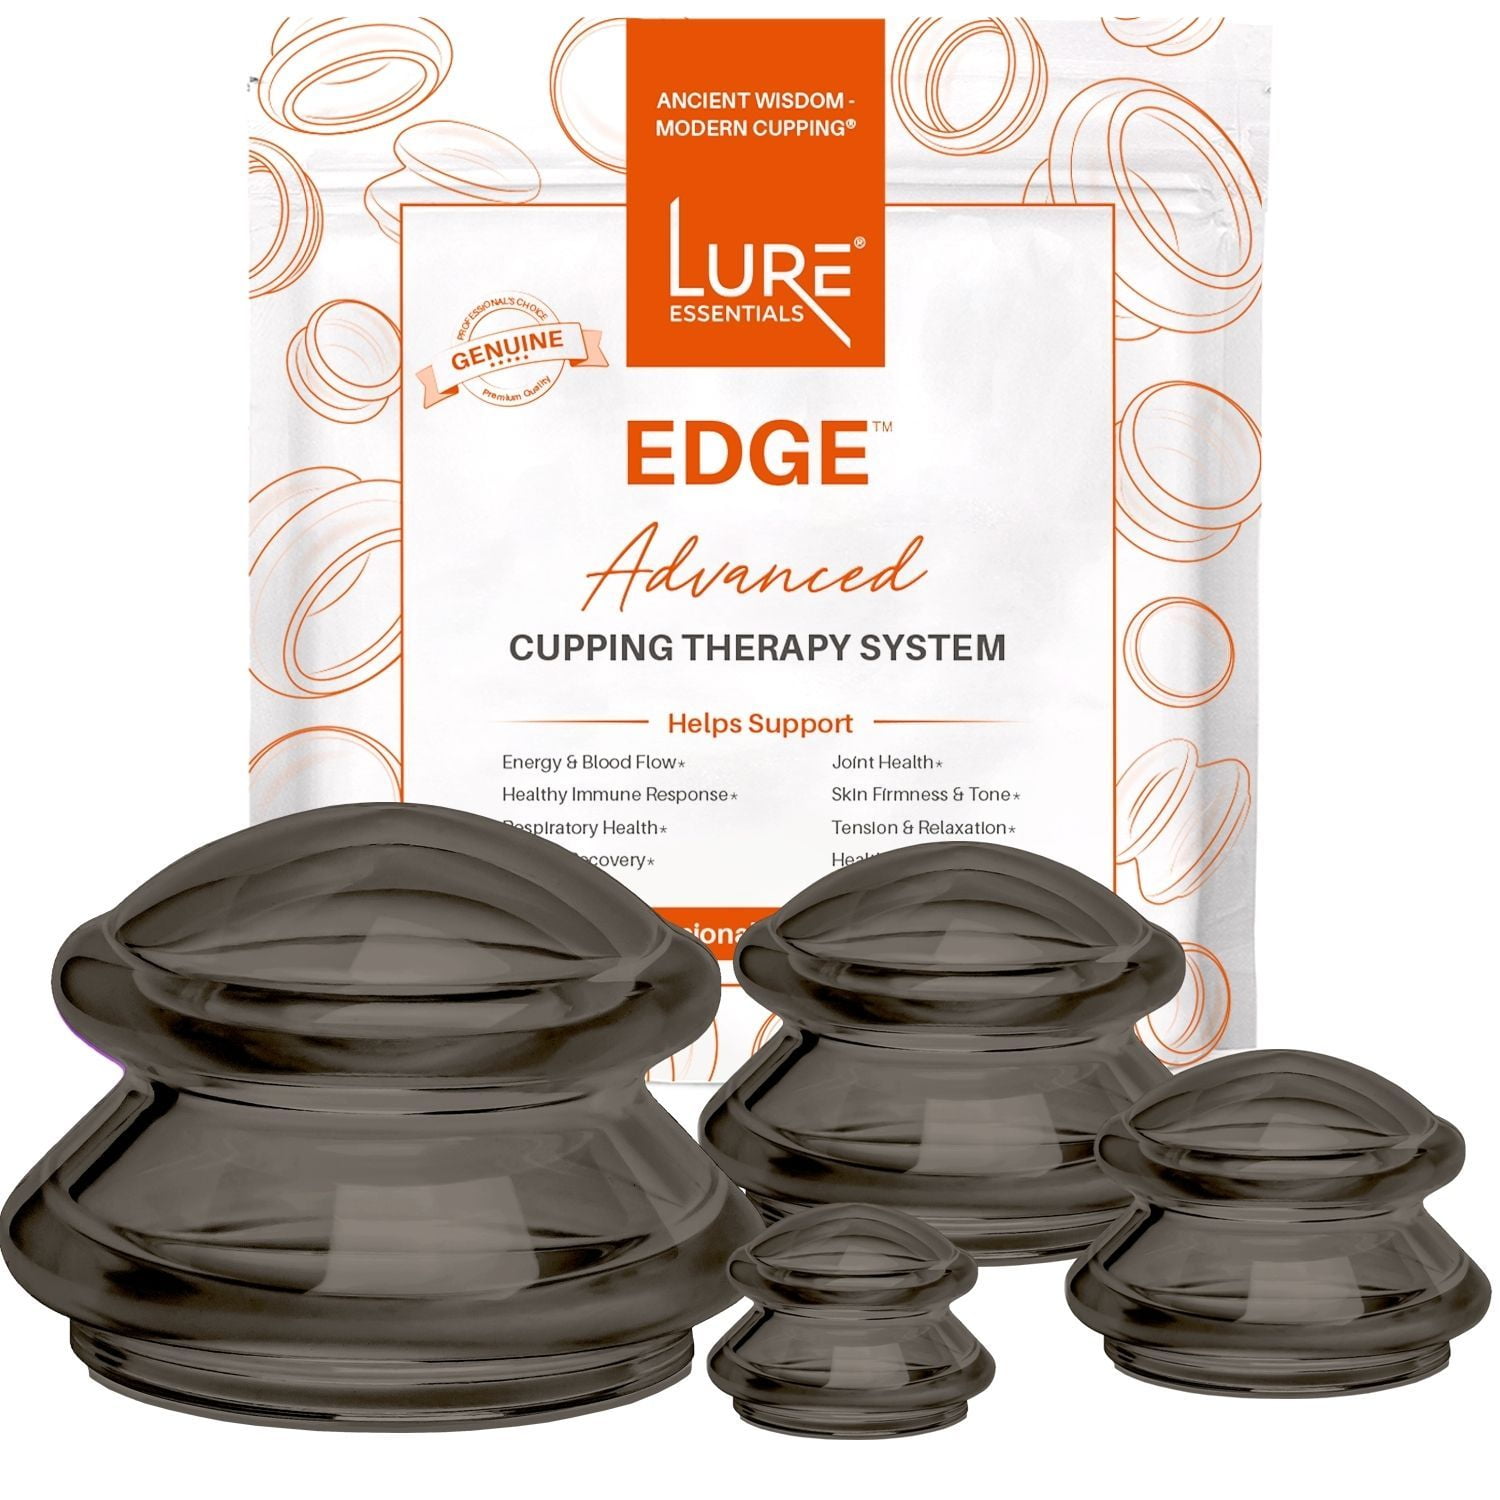 LURE Essentials Edge Cupping Set – Ultra Onyx Silicone Cupping Therapy Set  for Cellulite Reduction and Myofascial Release - Massage Therapists and  Home Use (Set of 4, Onyx) 